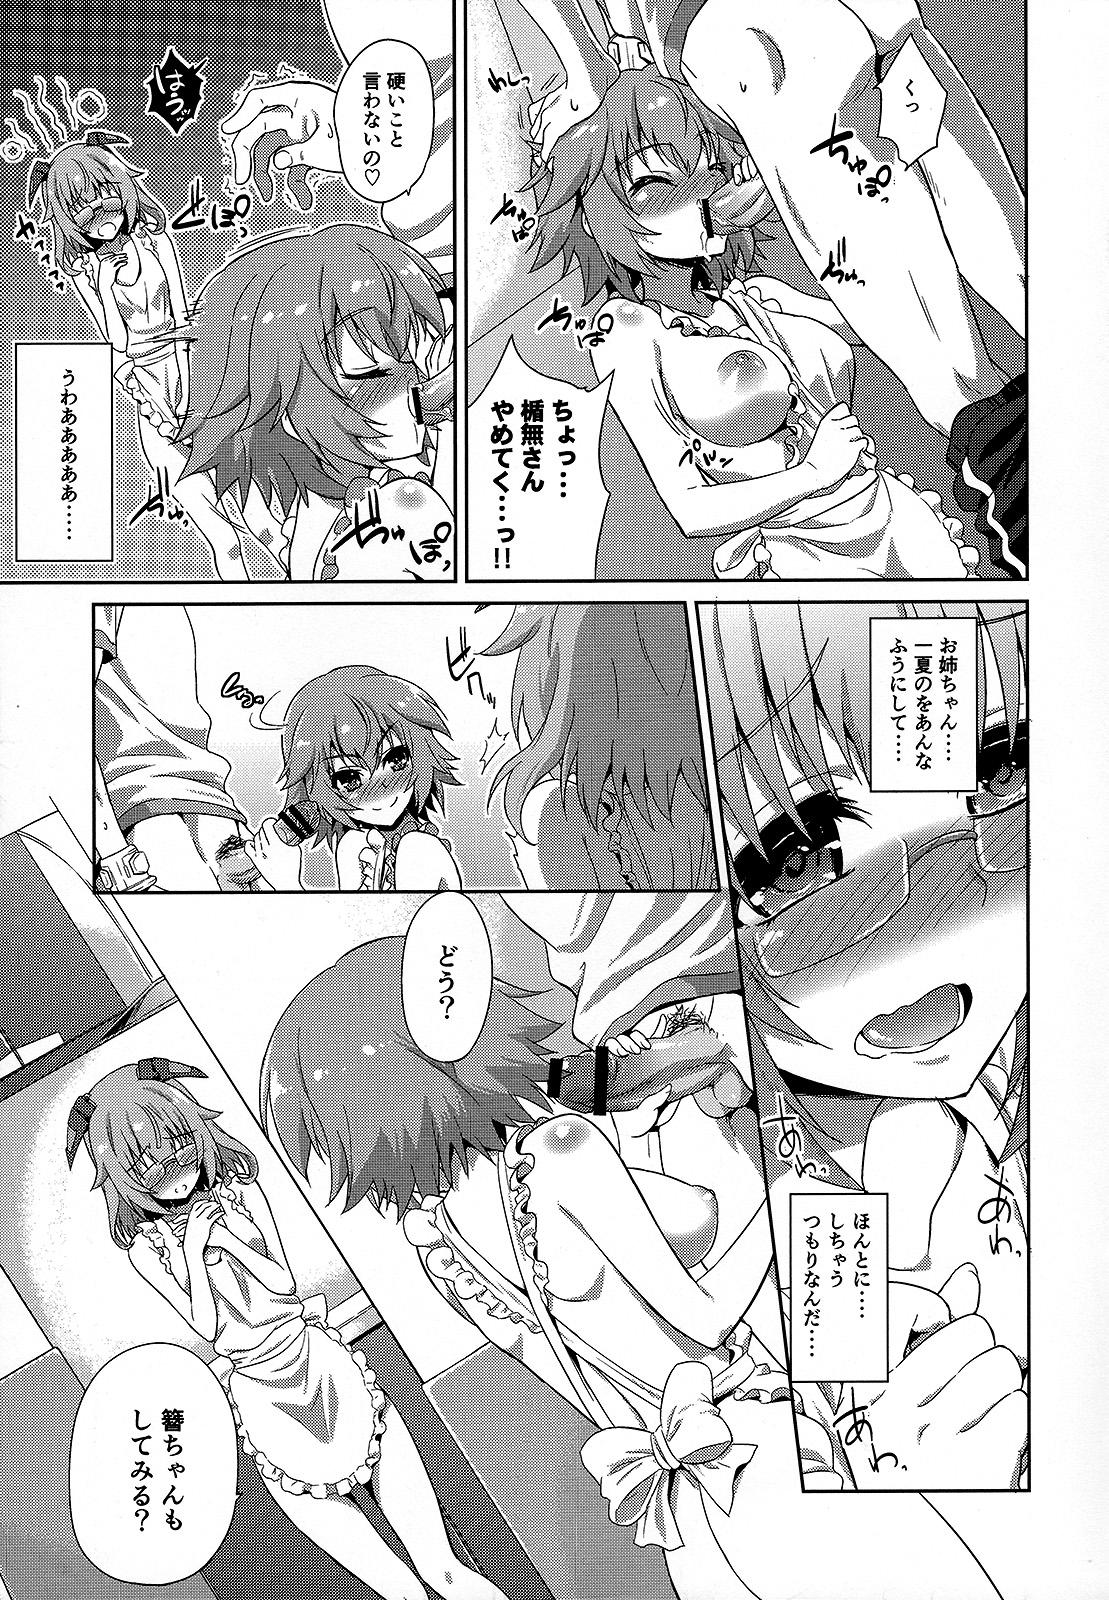 Audition IS ICHIKA LOVE SISTERS!! - Infinite stratos Perrito - Page 6